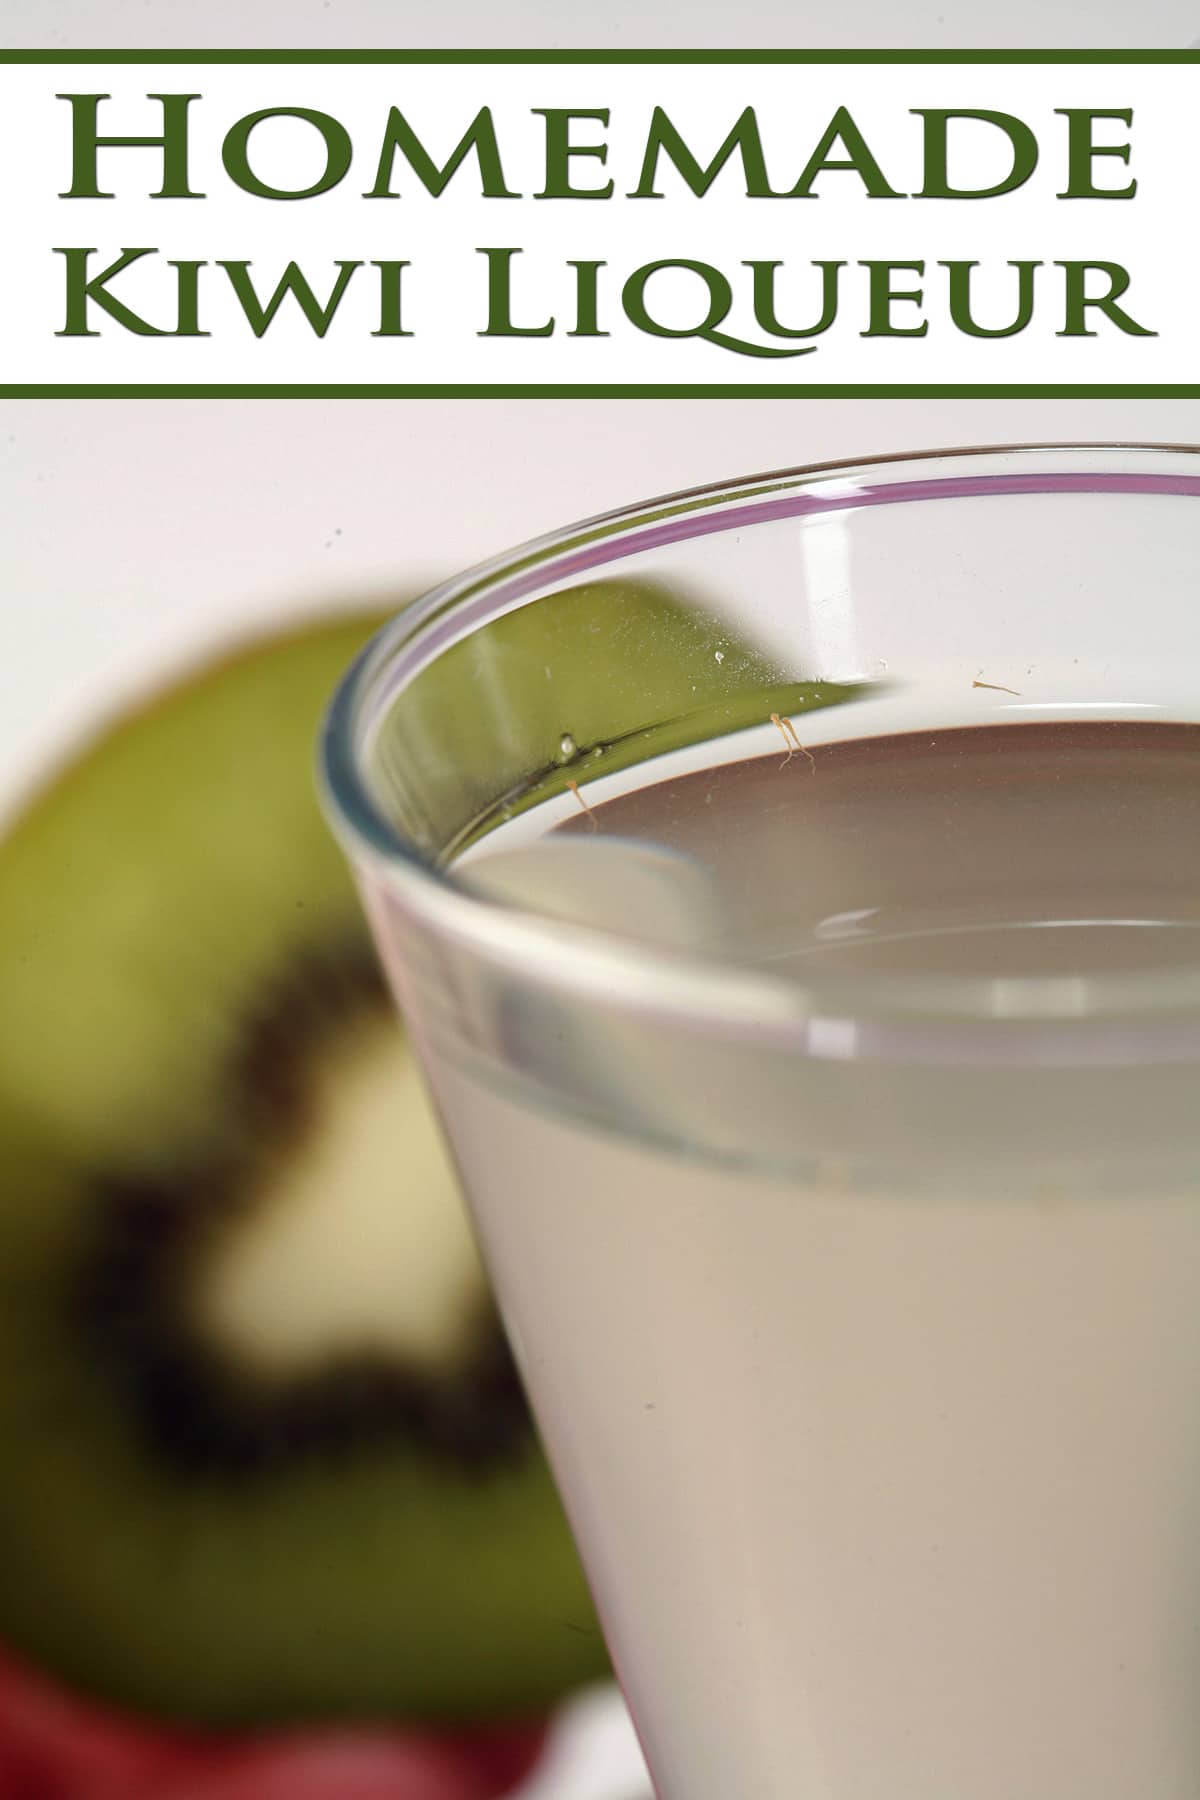 A fancy shot glass of homemade kiwi liquer.  There is a sliced open kiwi behind it.